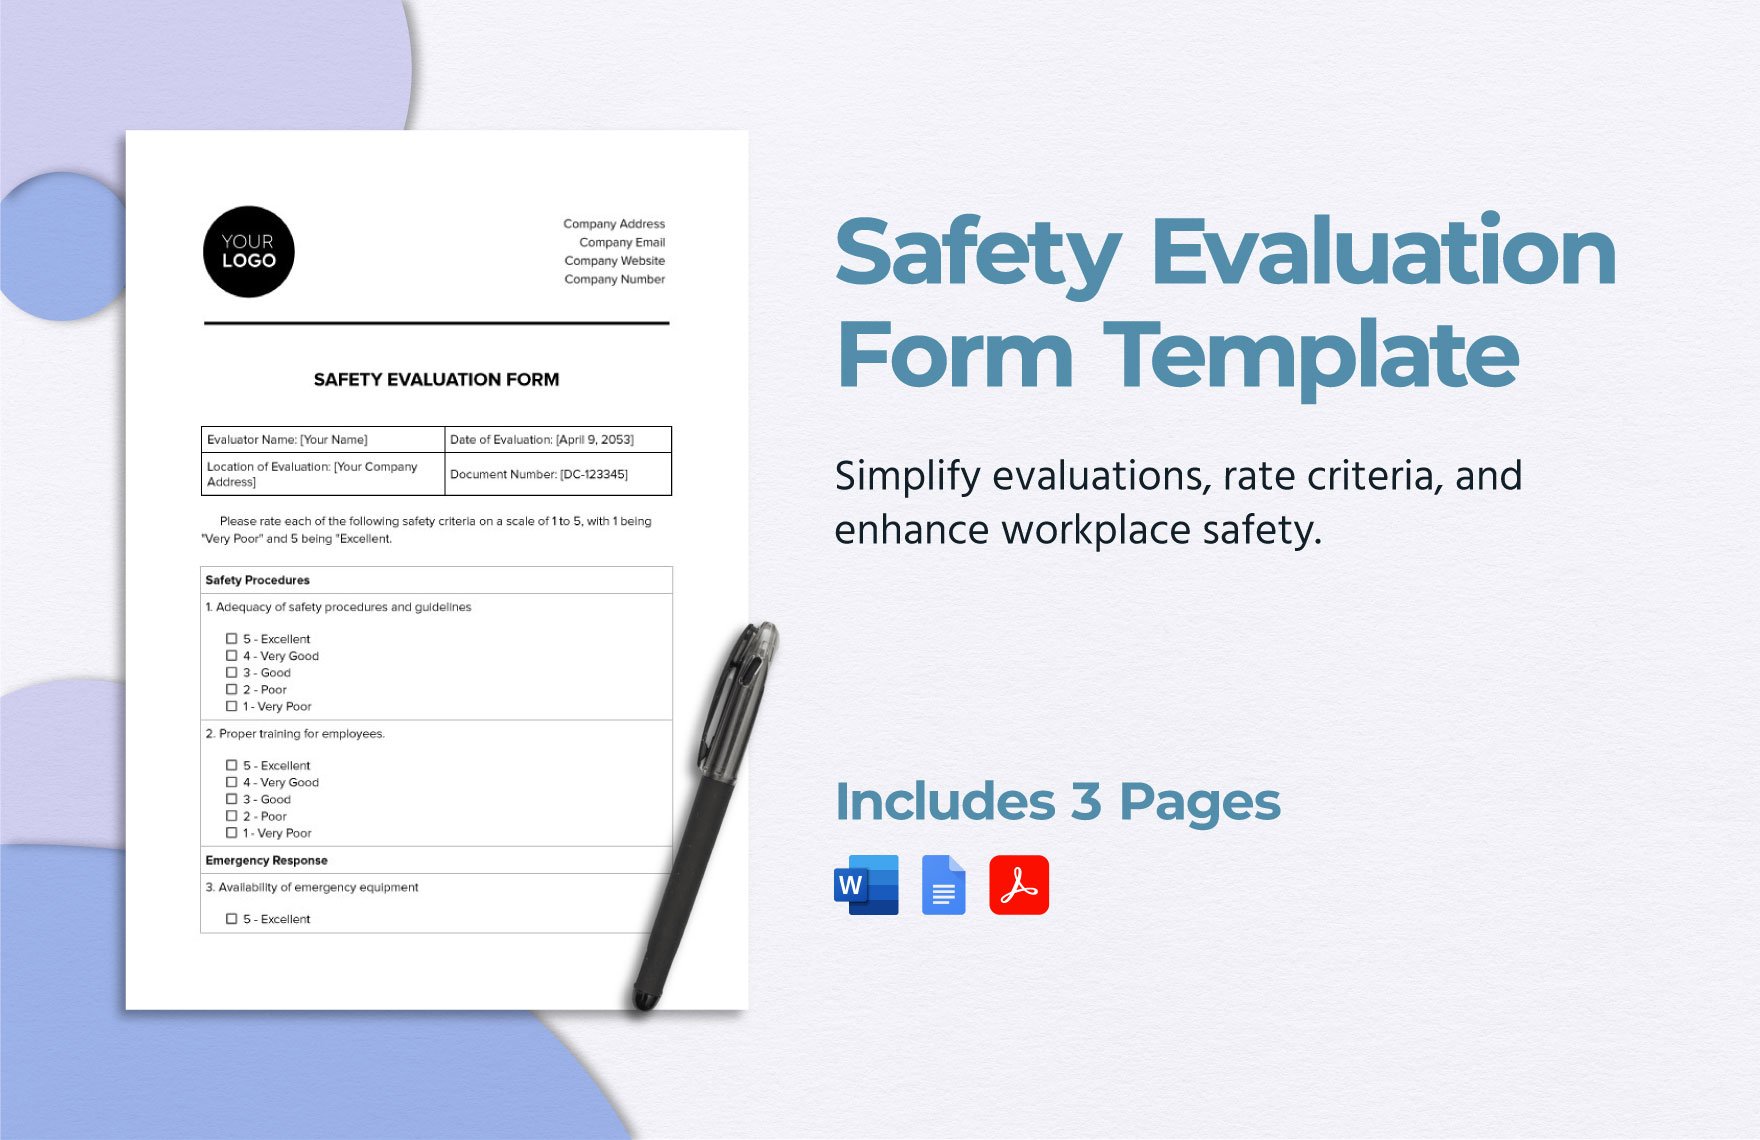 Safety Evaluation Form Template in Word, Google Docs, PDF